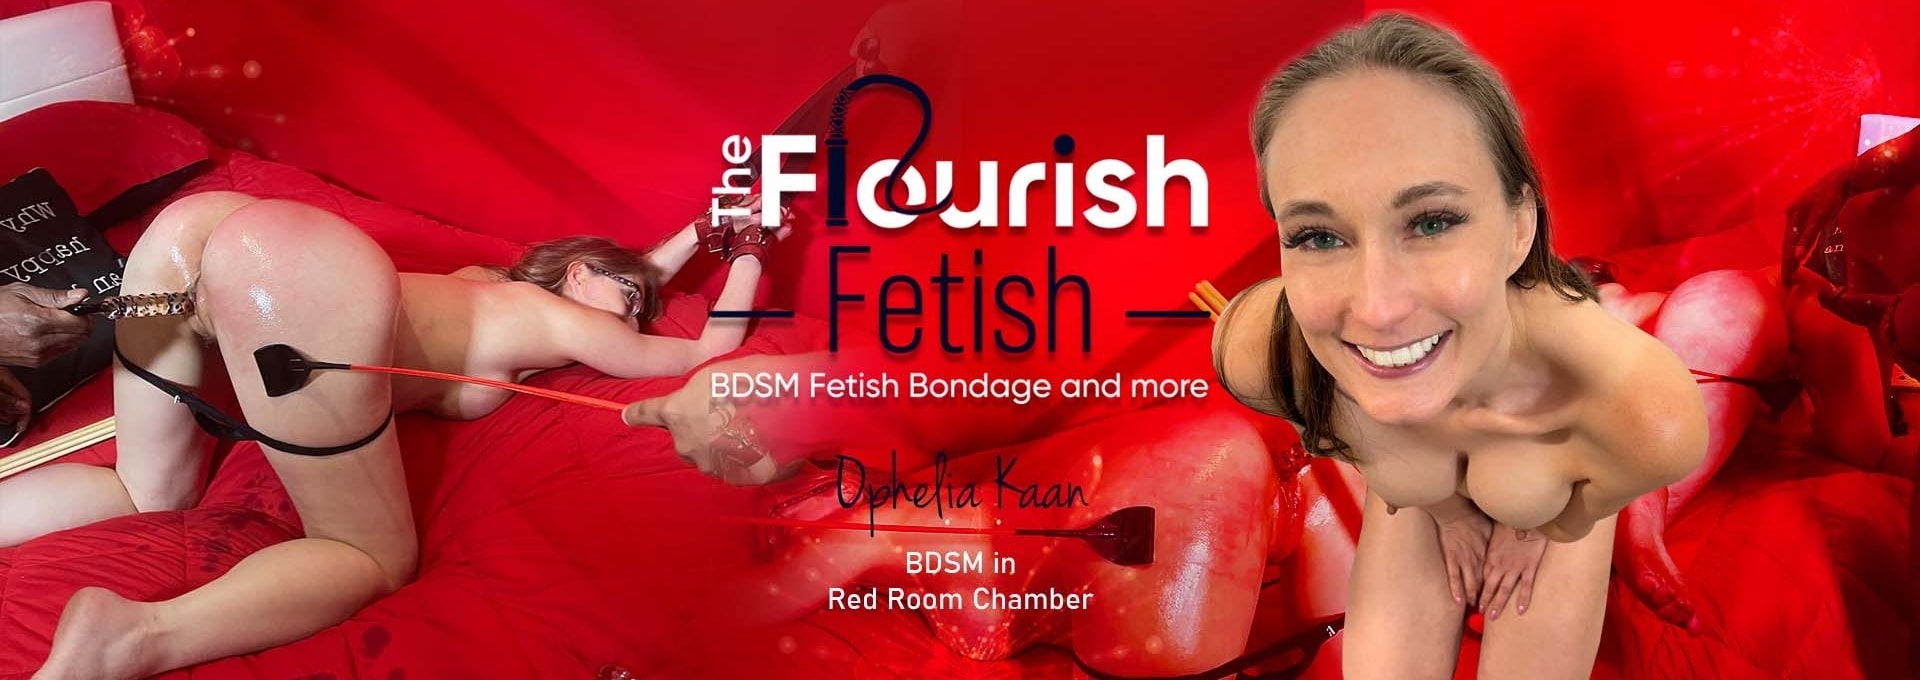 Ophelia Kaan gets Anal Bondage in the Flourish Fetish BDSM Red Room Chamber